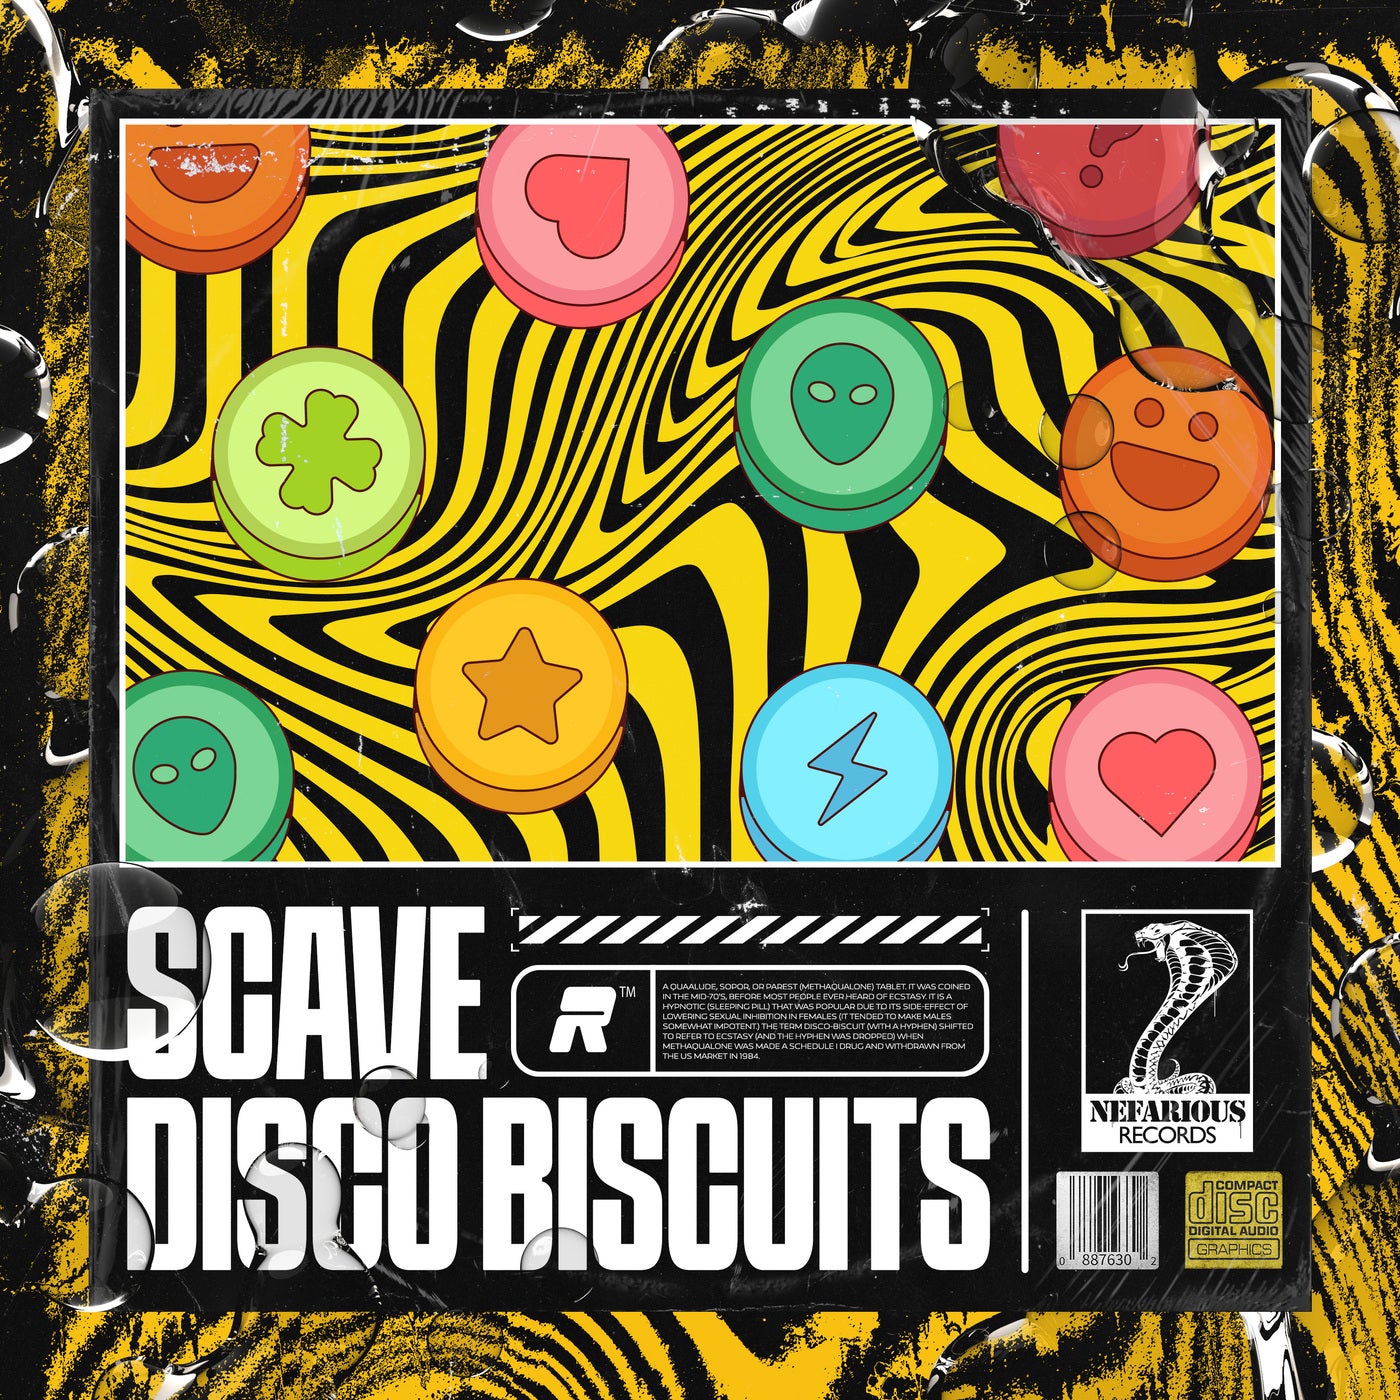 Disco Biscuits EP